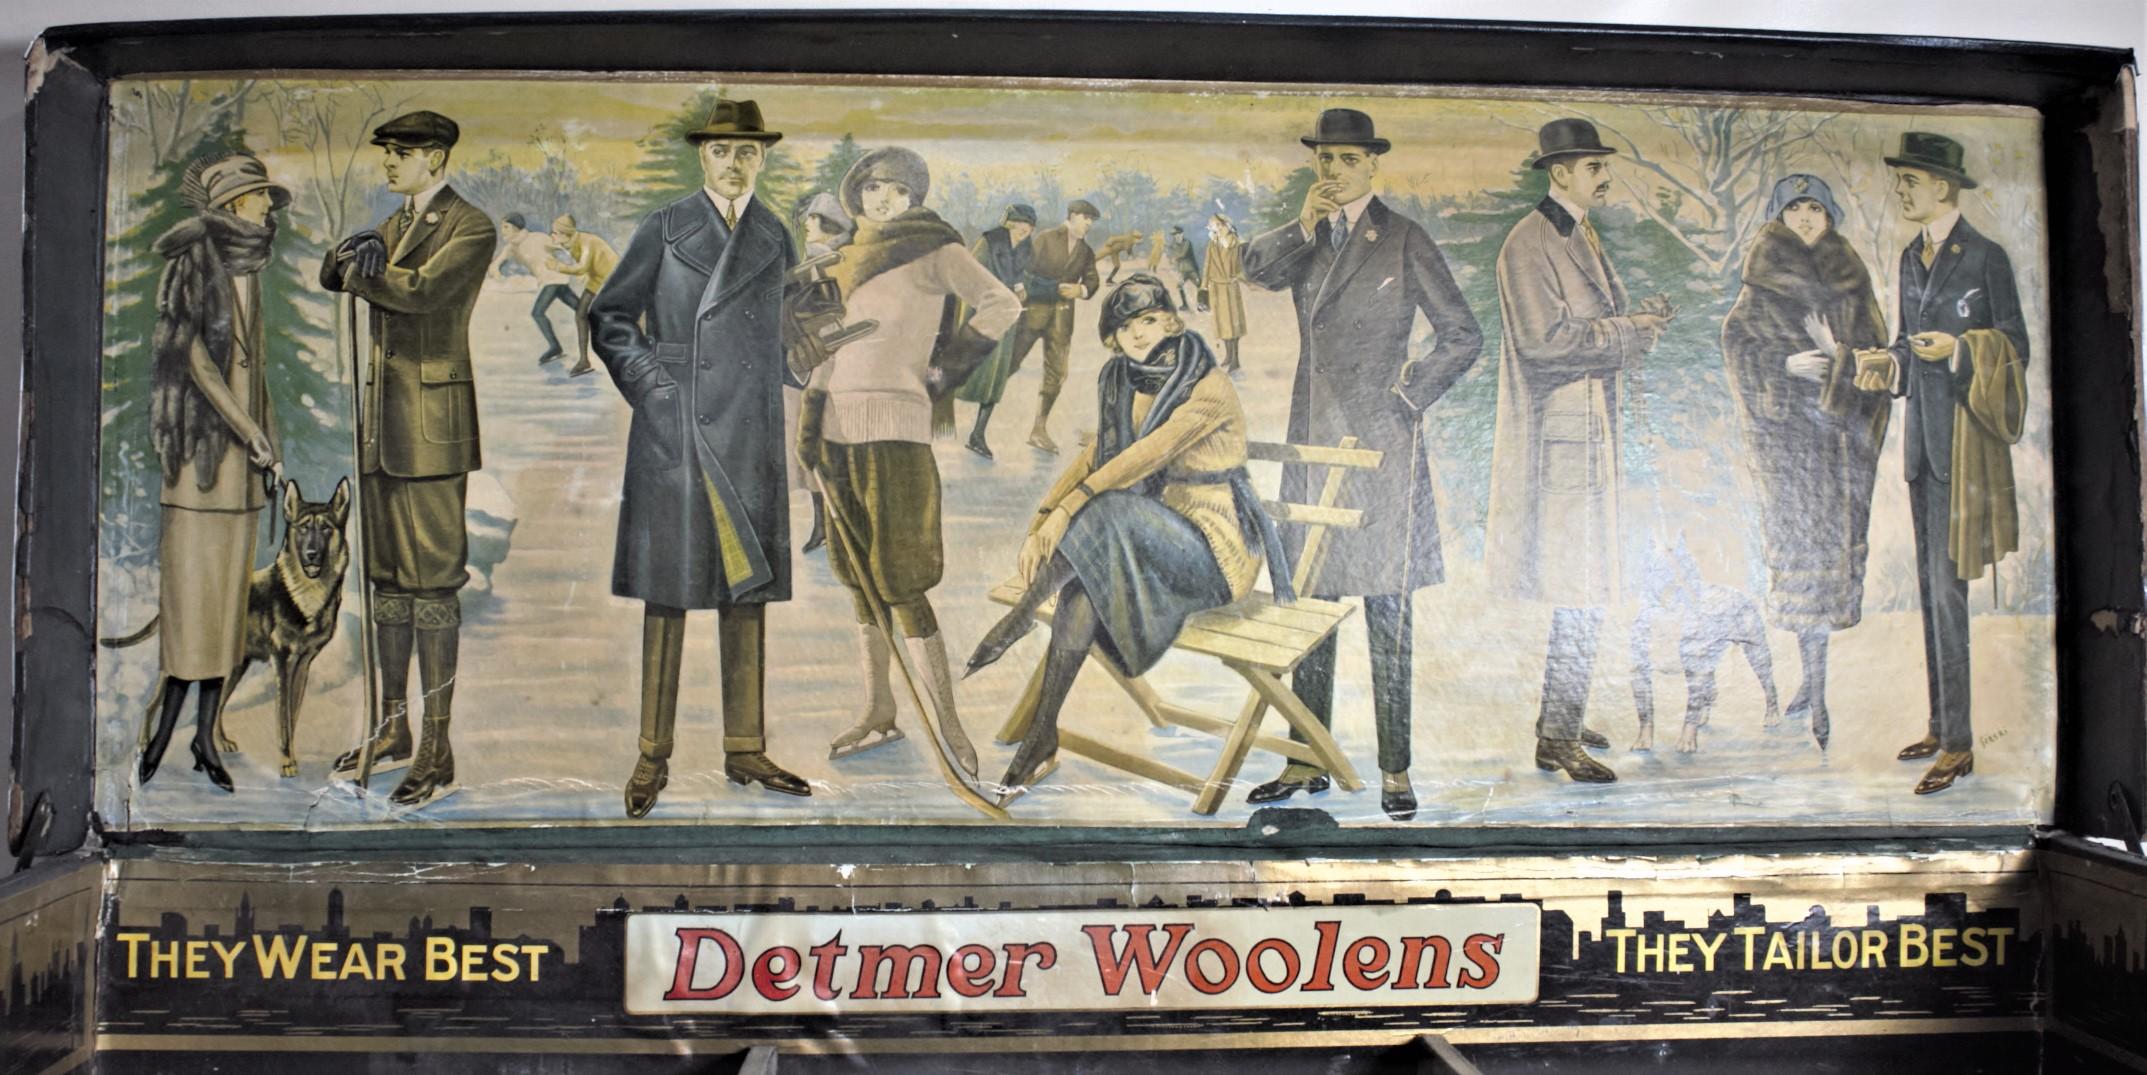 This promotional advertising store display box was made for the Detmer Woolens Company of the United States in circa 1945. This box was either sent to various clothing retailers or taken by their sales staff to promote and sell their wool products.